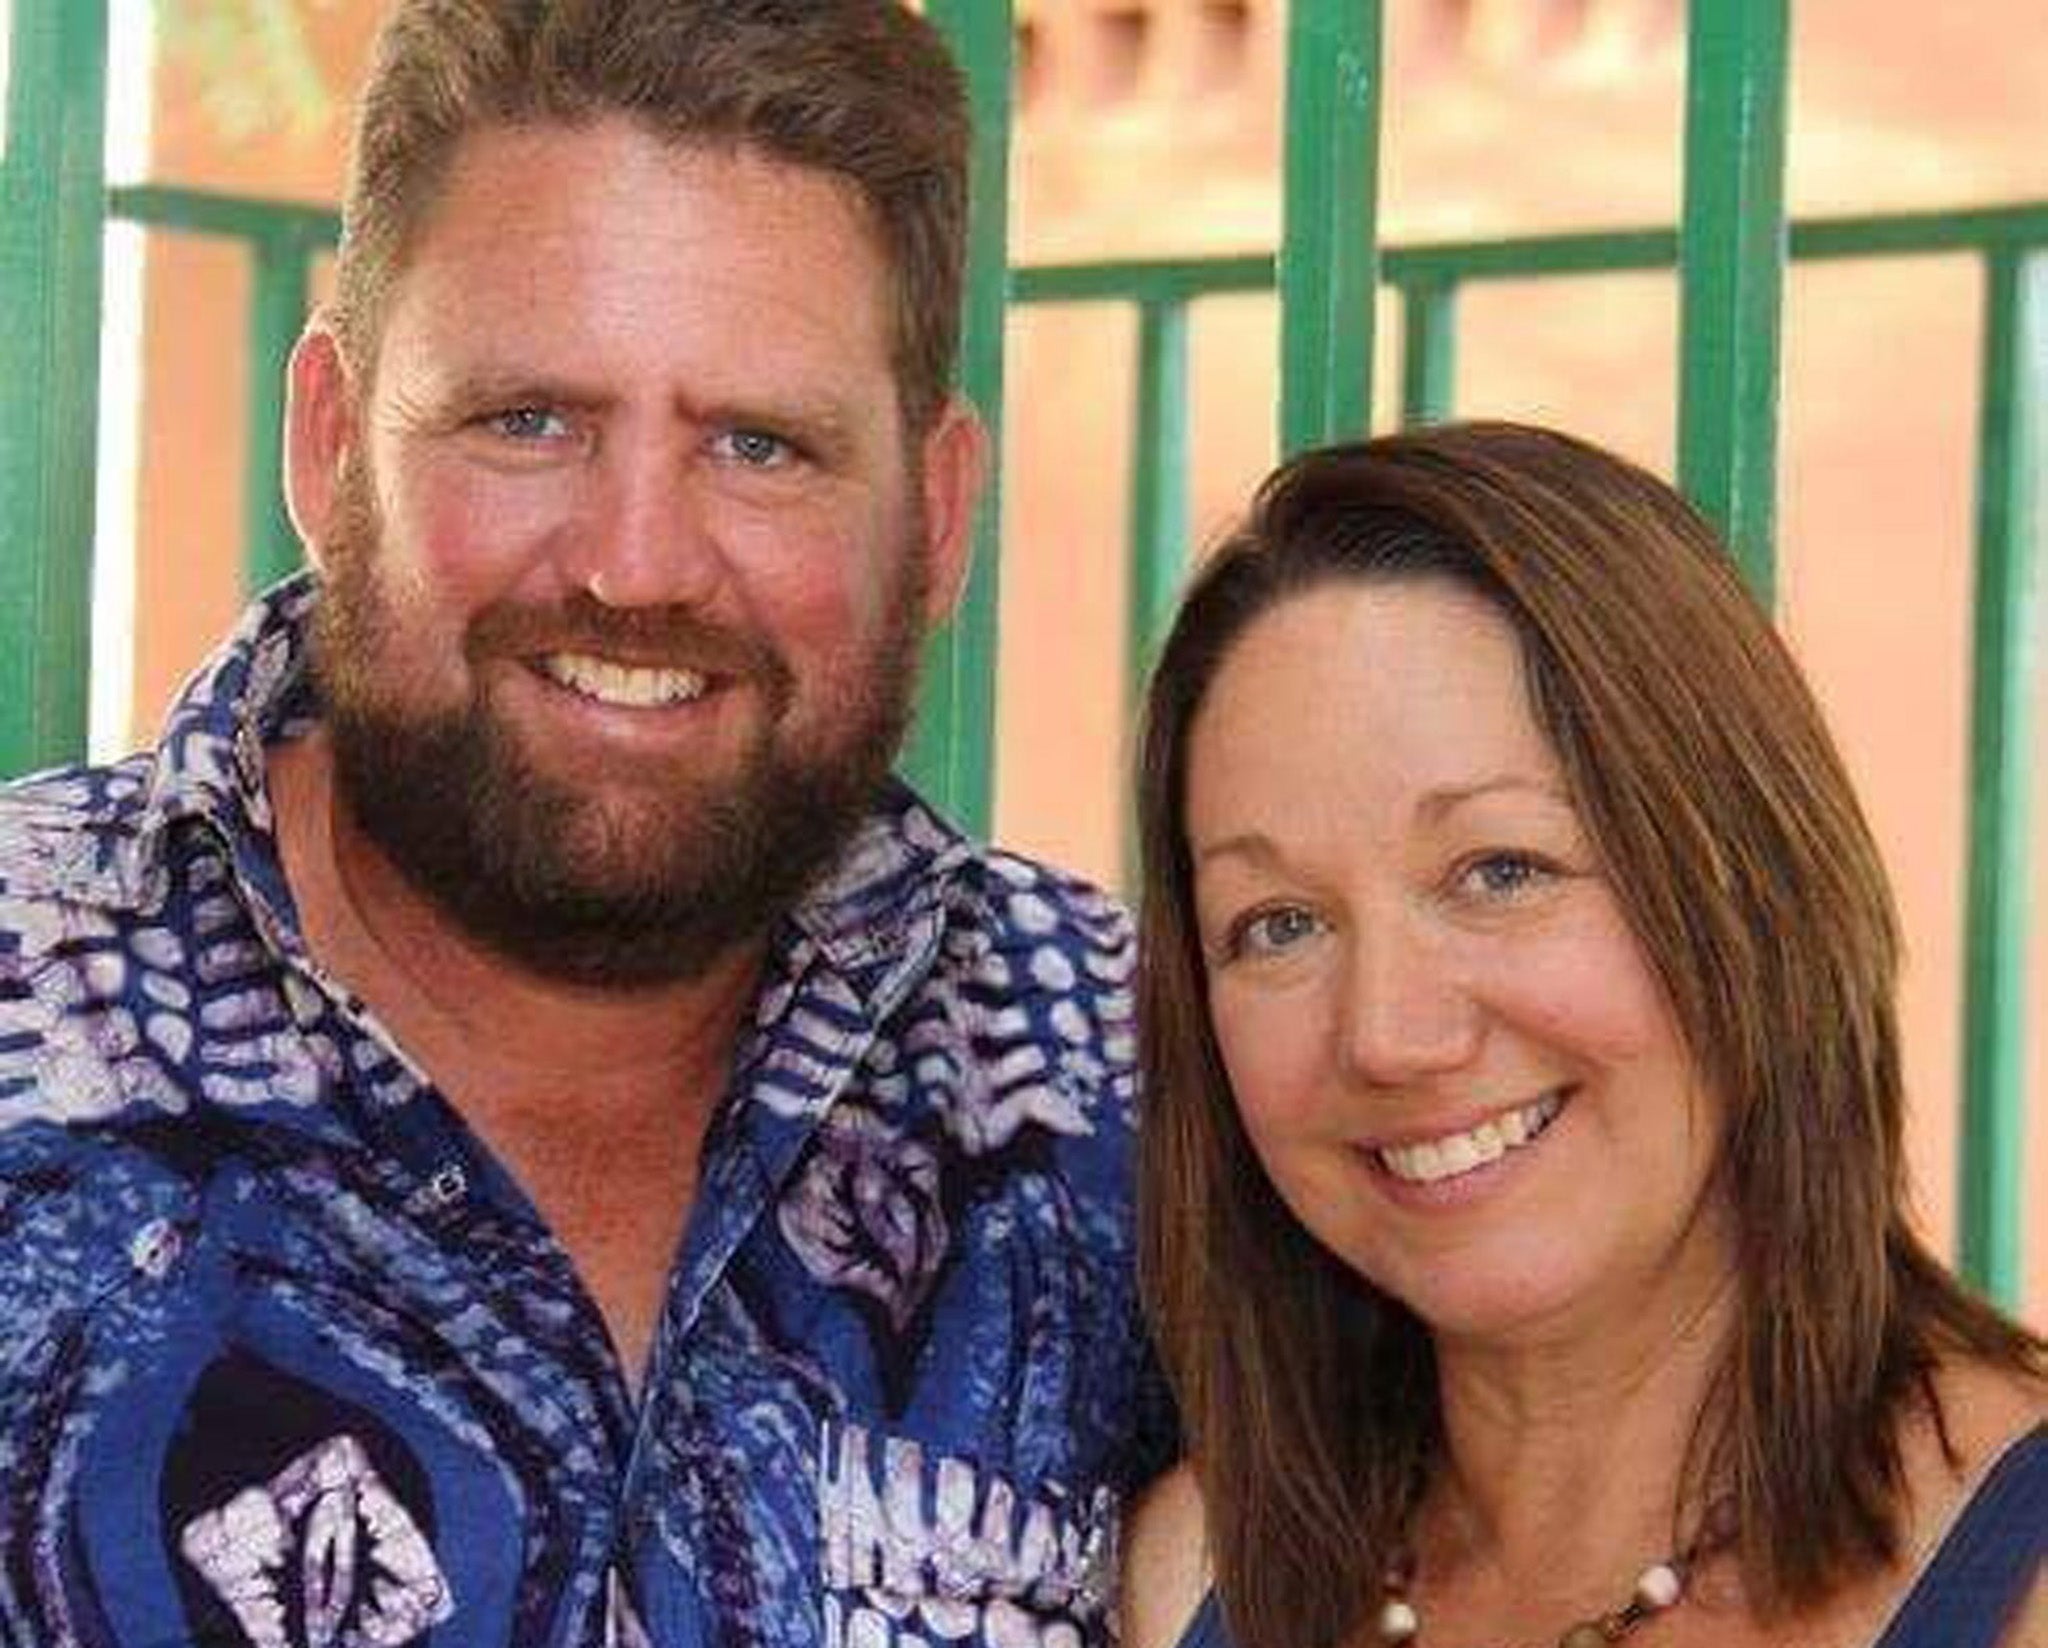 Michael Riddering, 45, (pictured with his wife Amy Riddering-Boyle) was killed at the Cappuccino Cafe during the Islamist siege in Ouagadougou, Burkina Faso